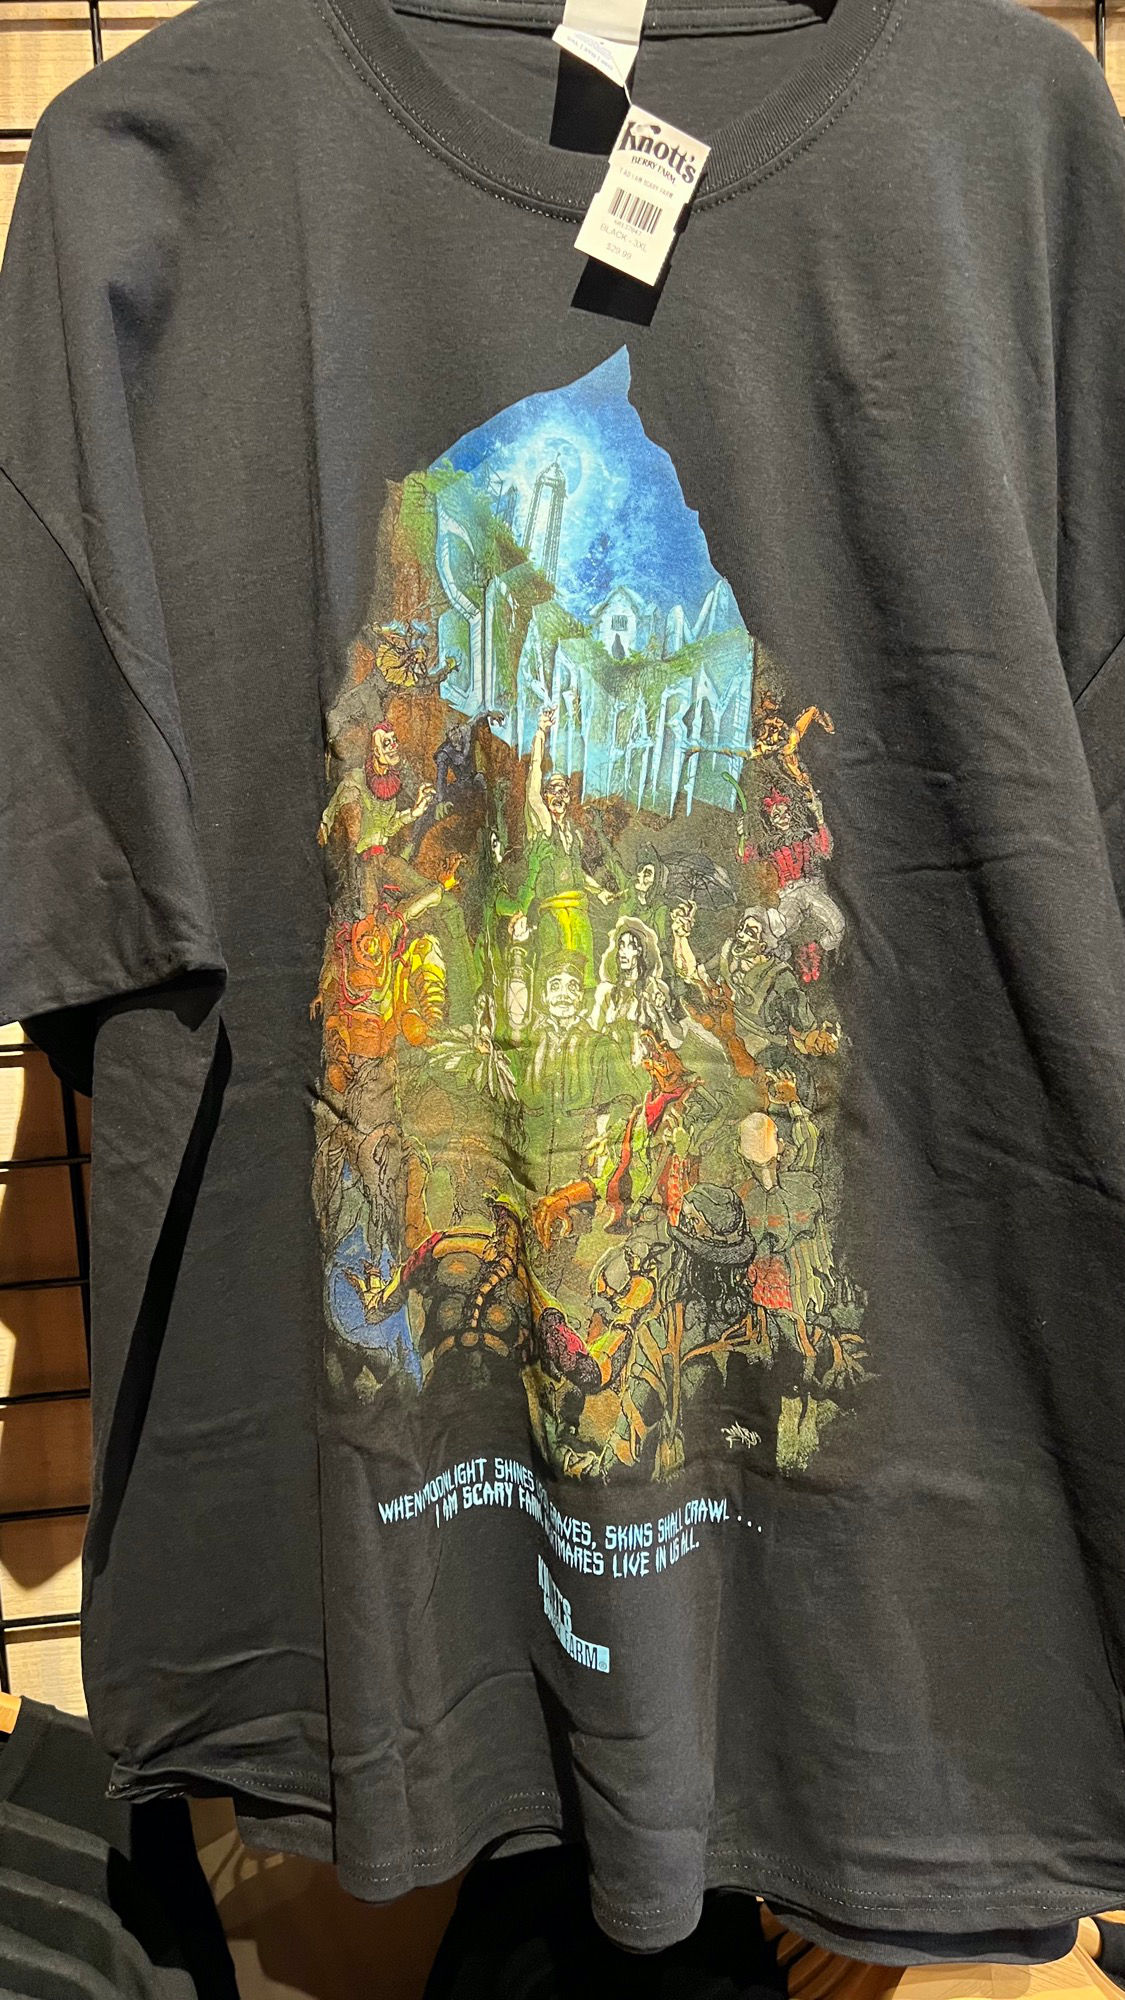 Toy Junction Knott's Scary Farm Shirts